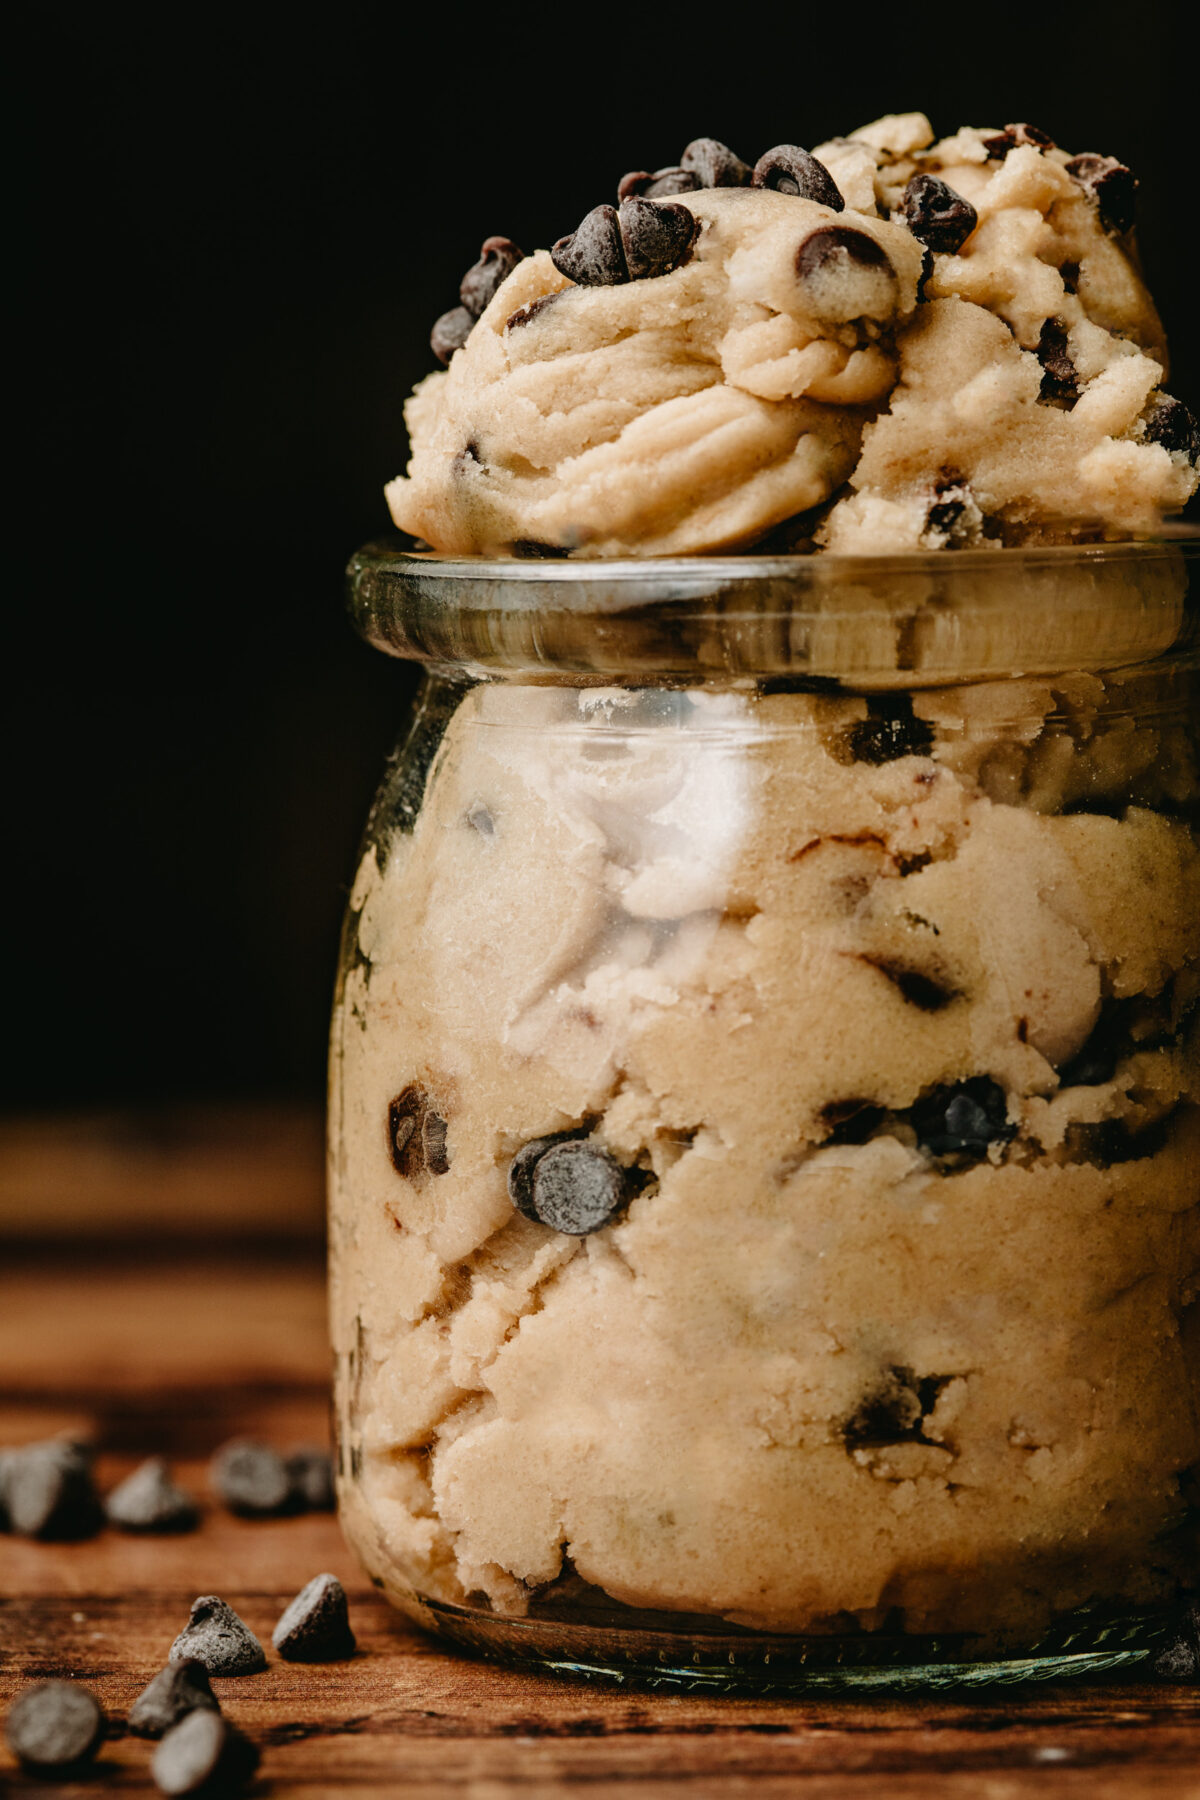 Close up view of jar filled with edible chocolate chip cookie dough on a wood surface, with mini chocolate chips scattered around it.